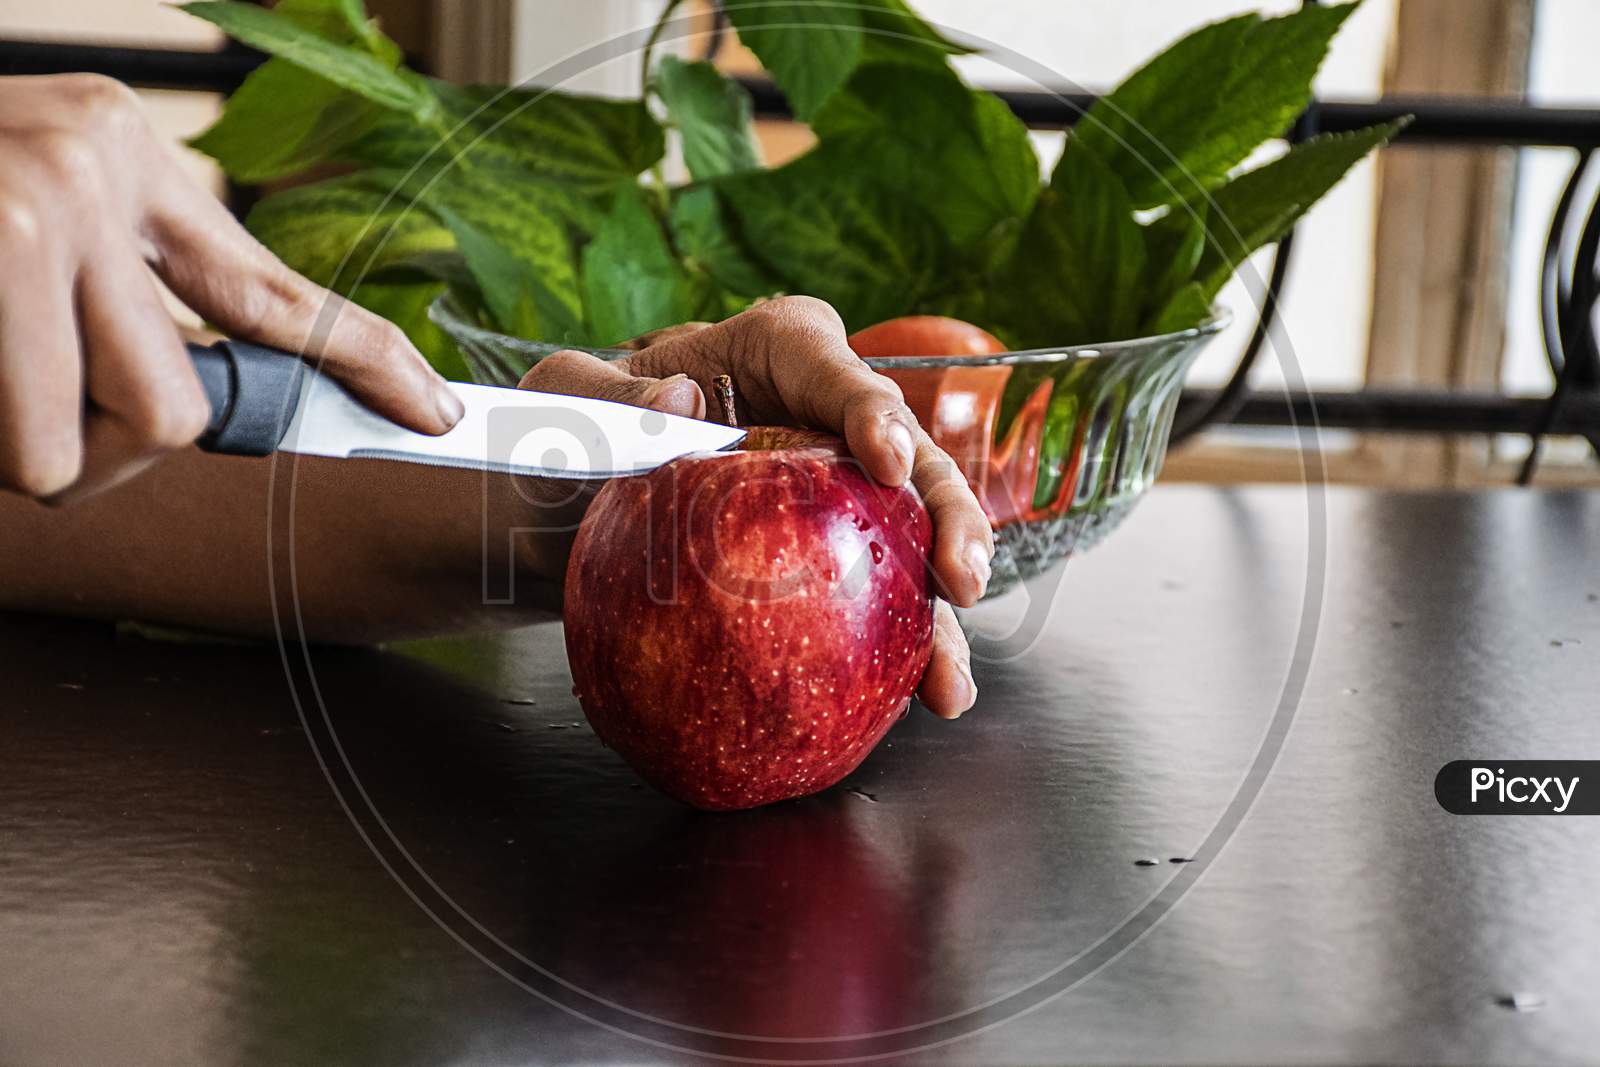 Stock Photo Of A Women Hand Cutting Fresh Red Apple In The Morning For Breakfast, Apple Kept On Black Color Table .